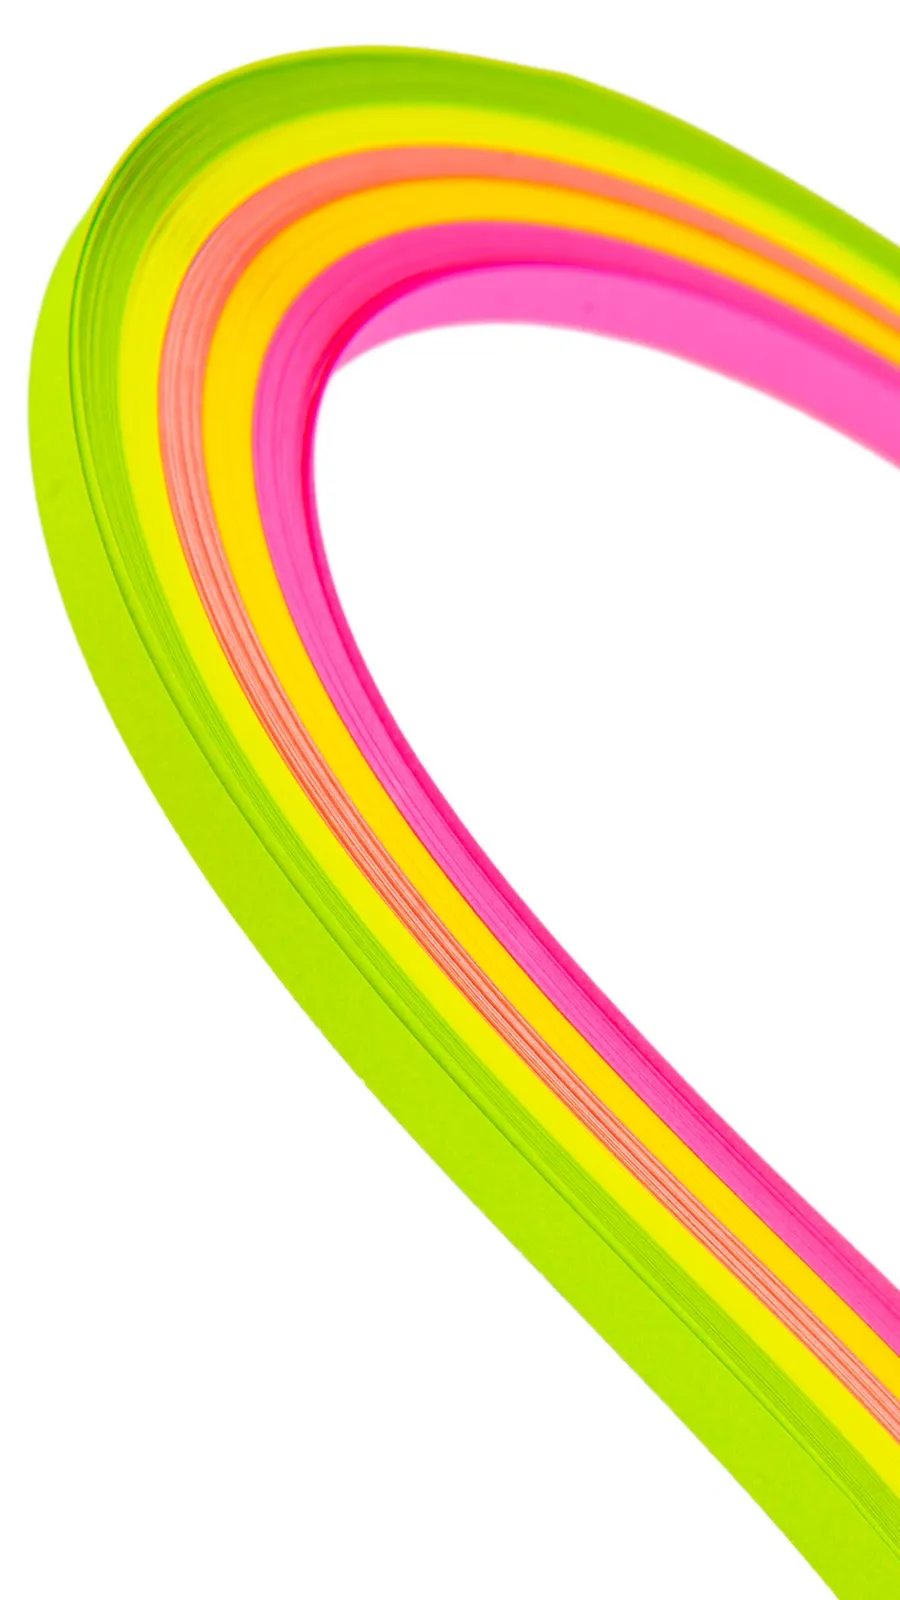 Curved colors zoom-backgrounds template